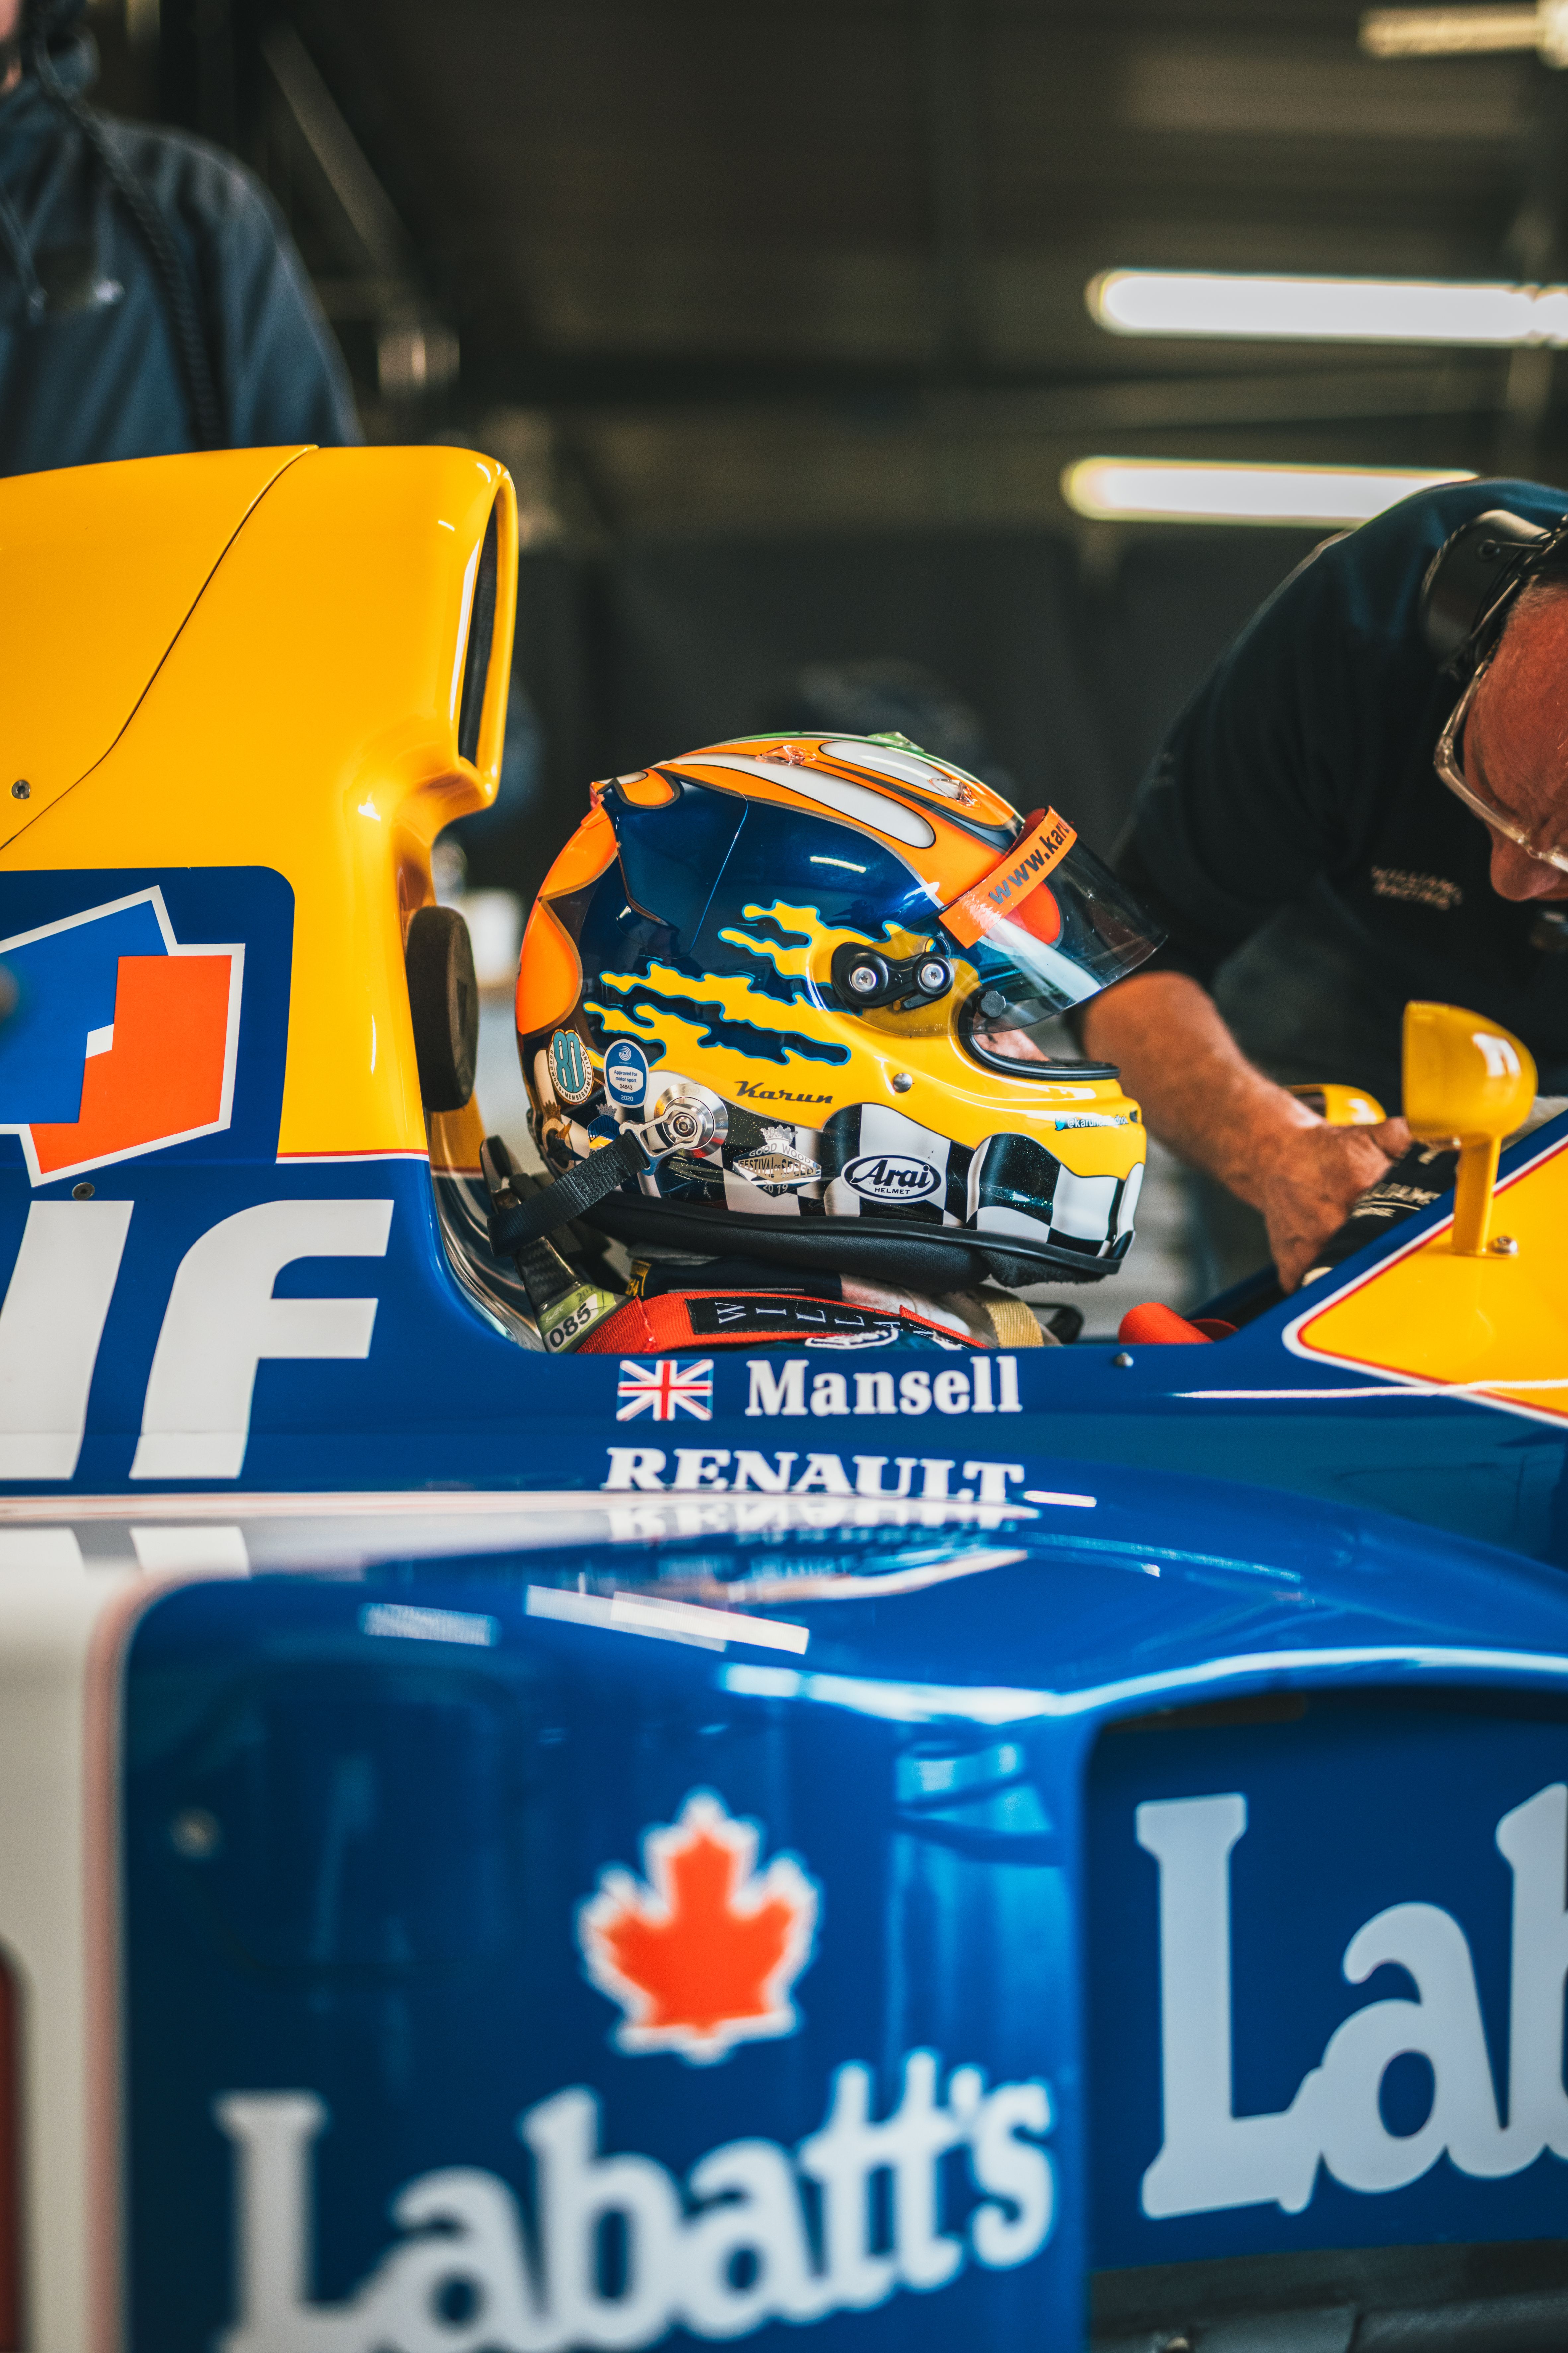 In Photos: Shaking down the FW14B | Williams Racing